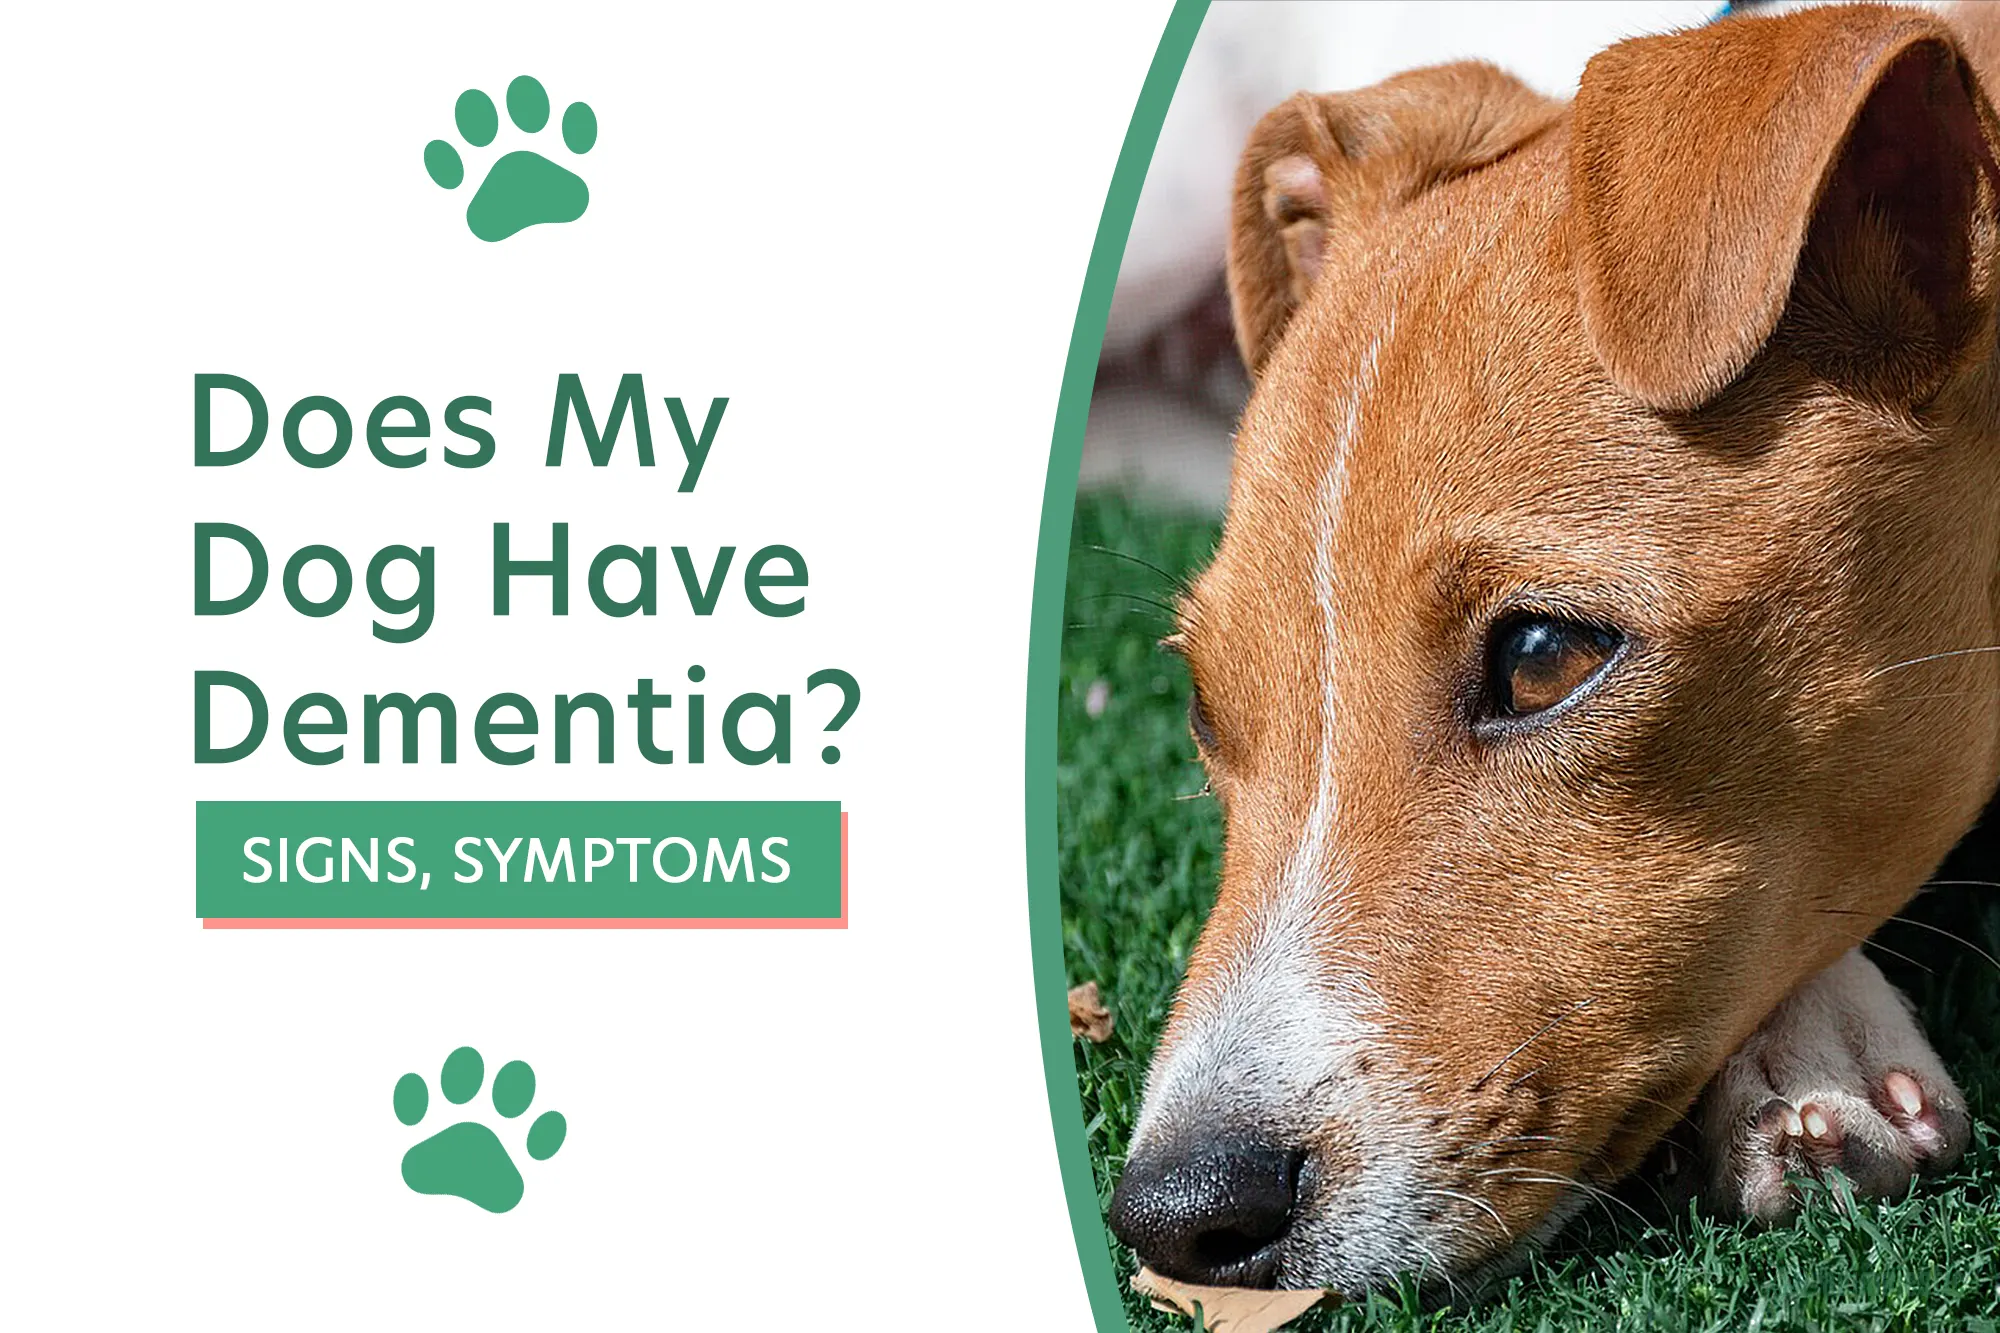 Does My Dog Have Dementia? Signs & Symptoms